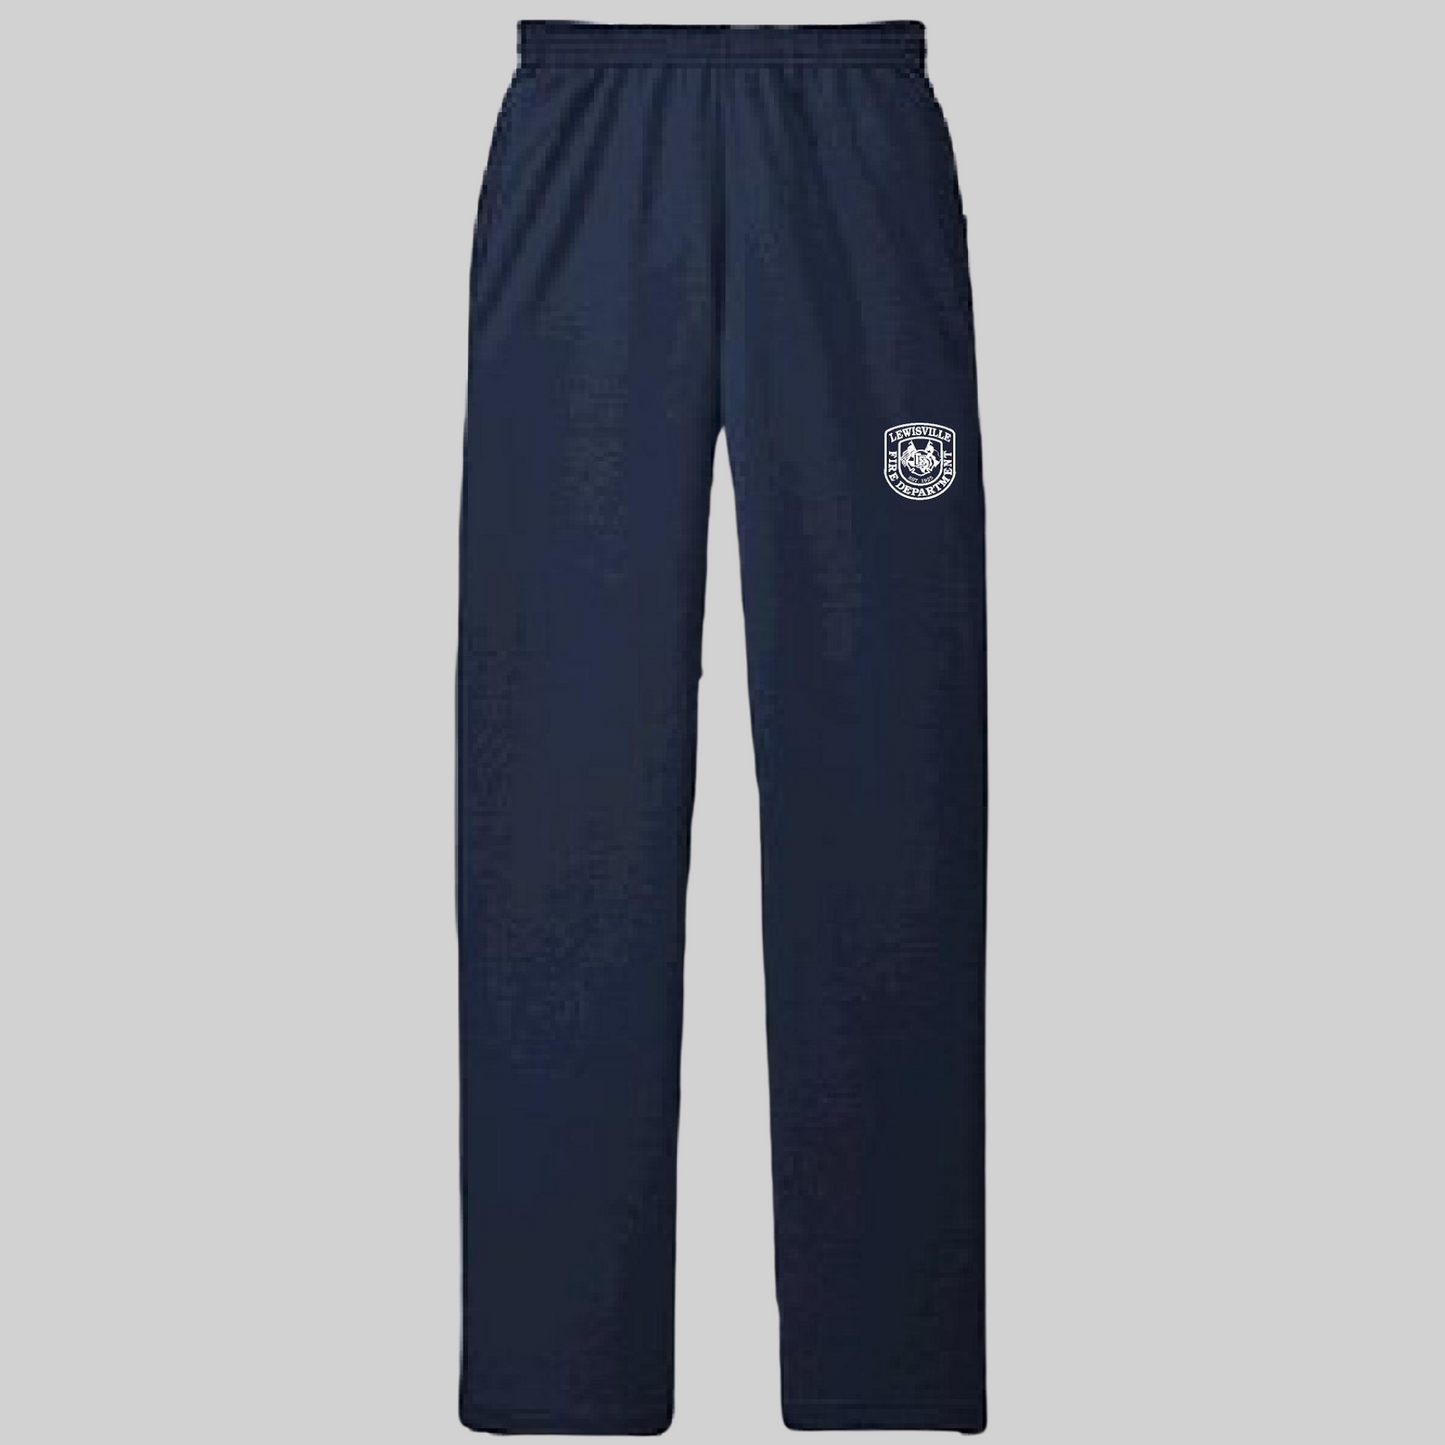 LFD Local 3606 Firefighters Non Association Members Sweatpants